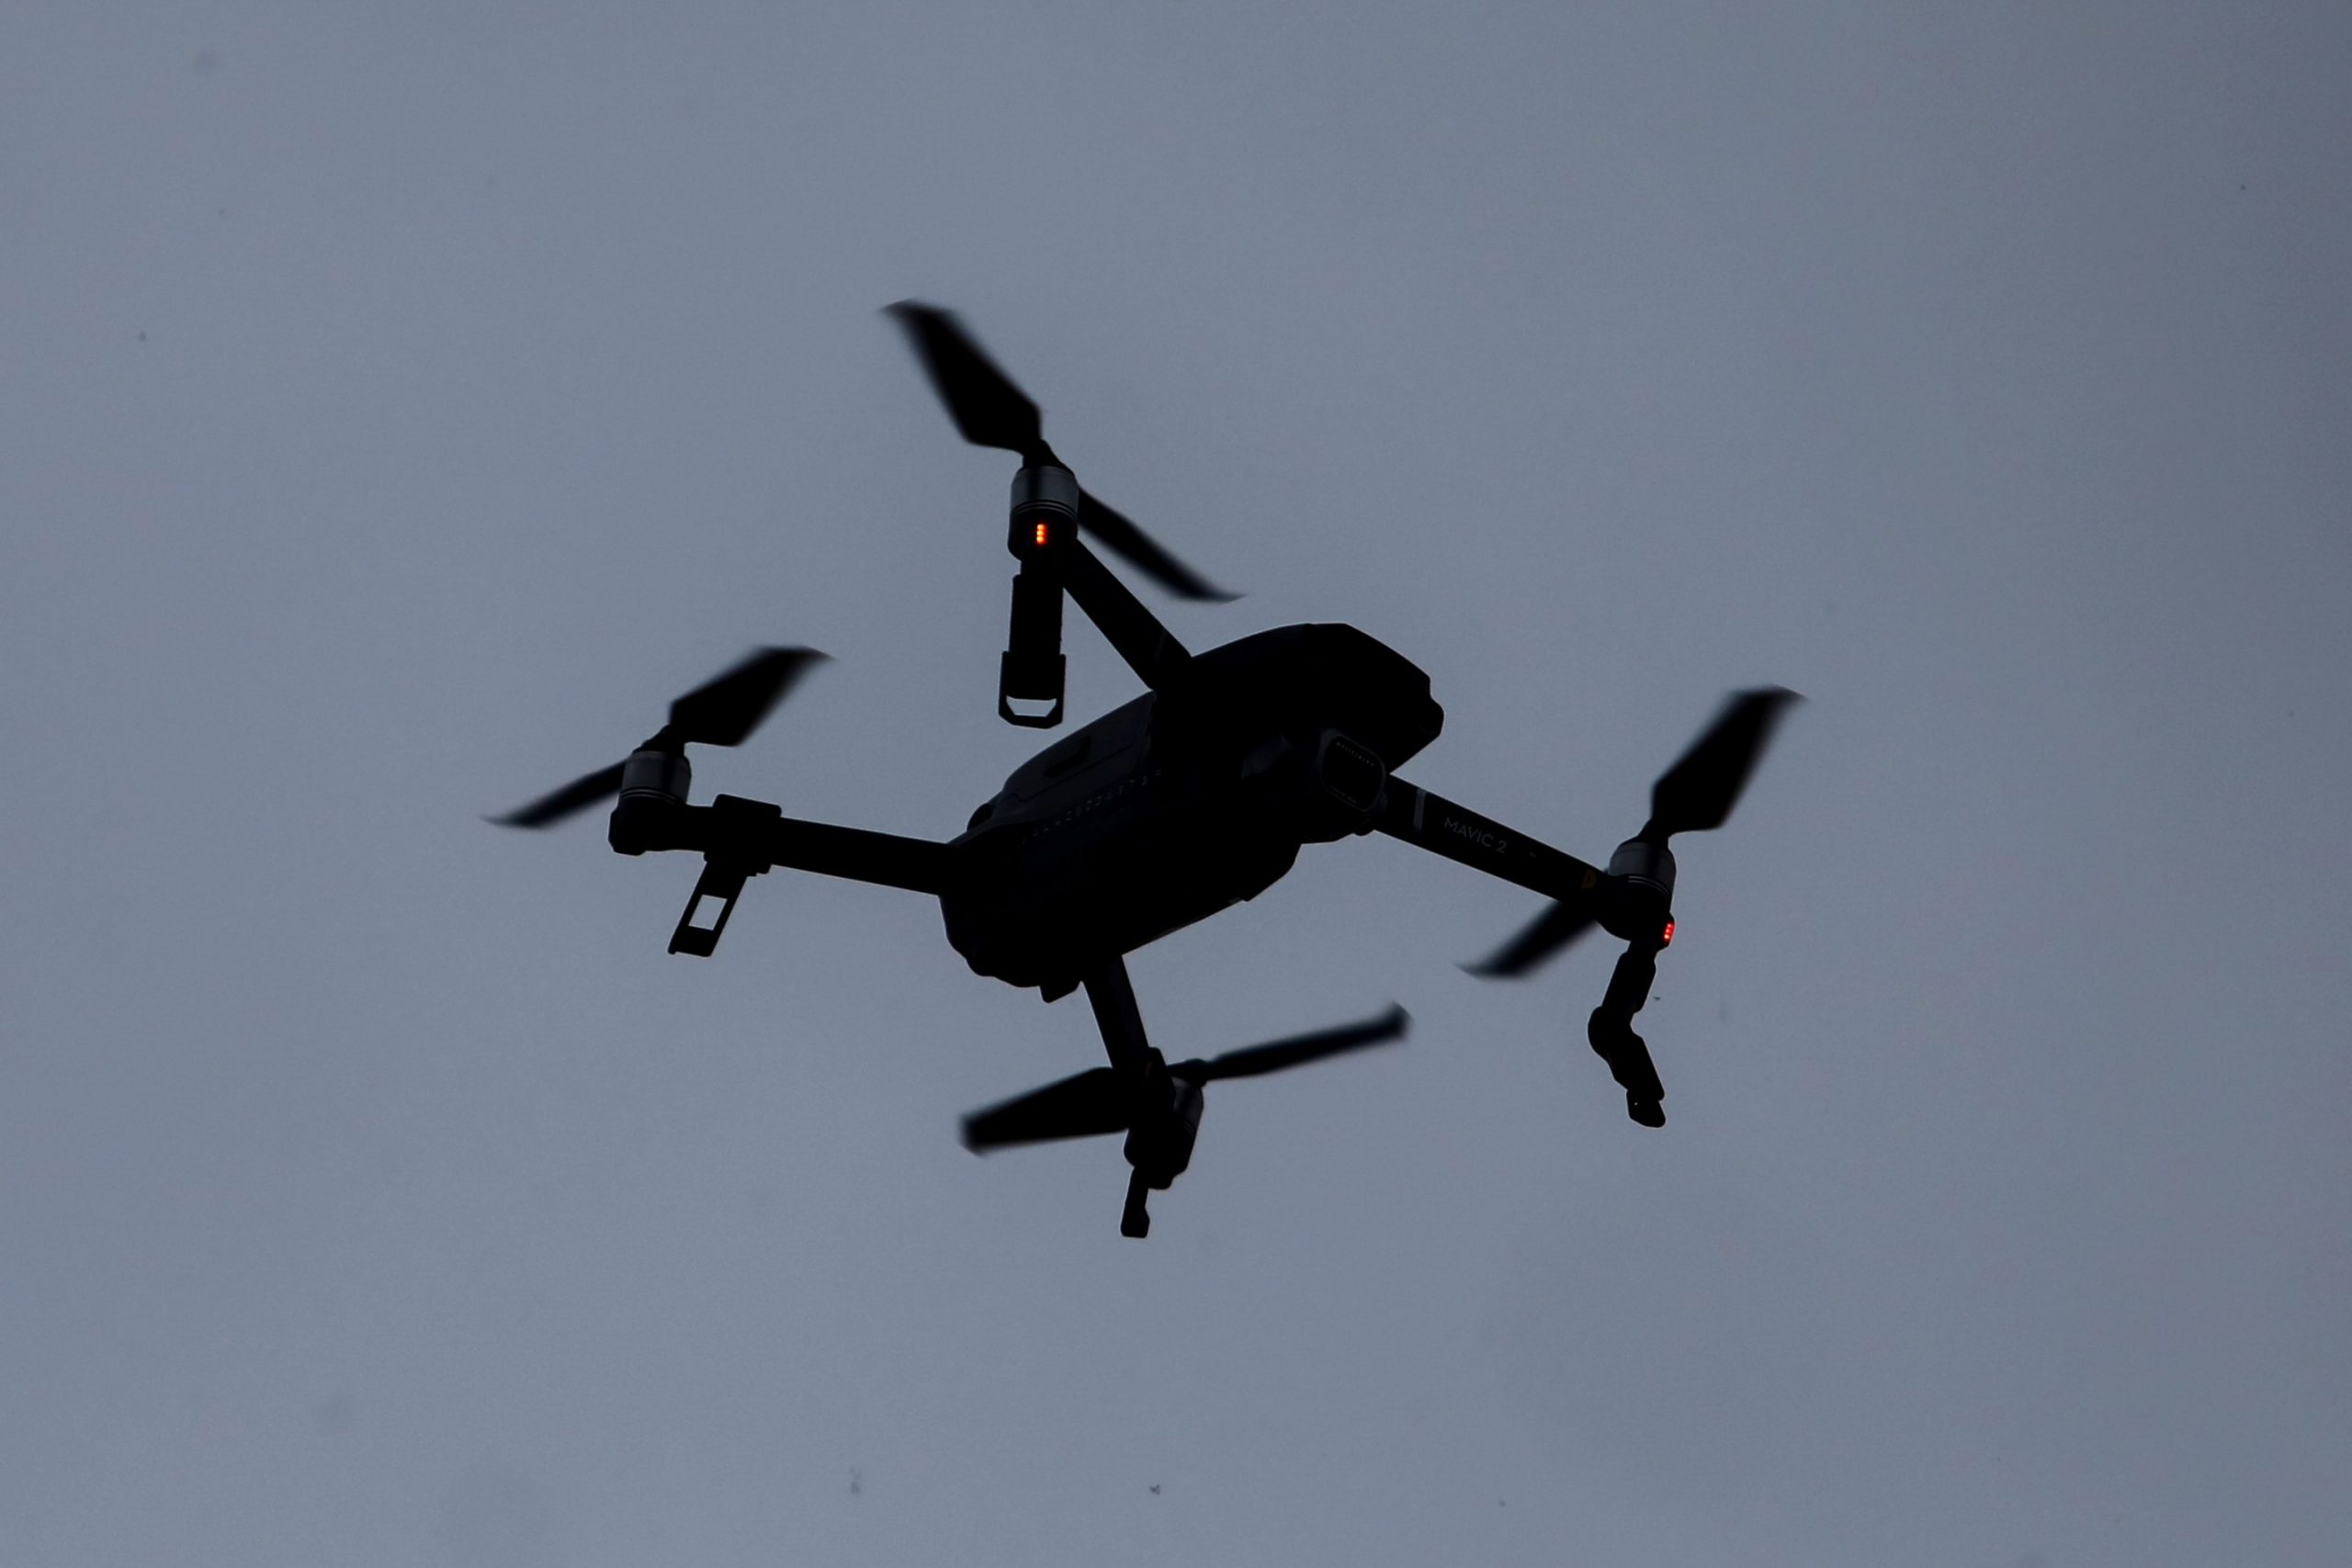 DJI suspends sales in Ukraine, Russia to stop military use of its drones